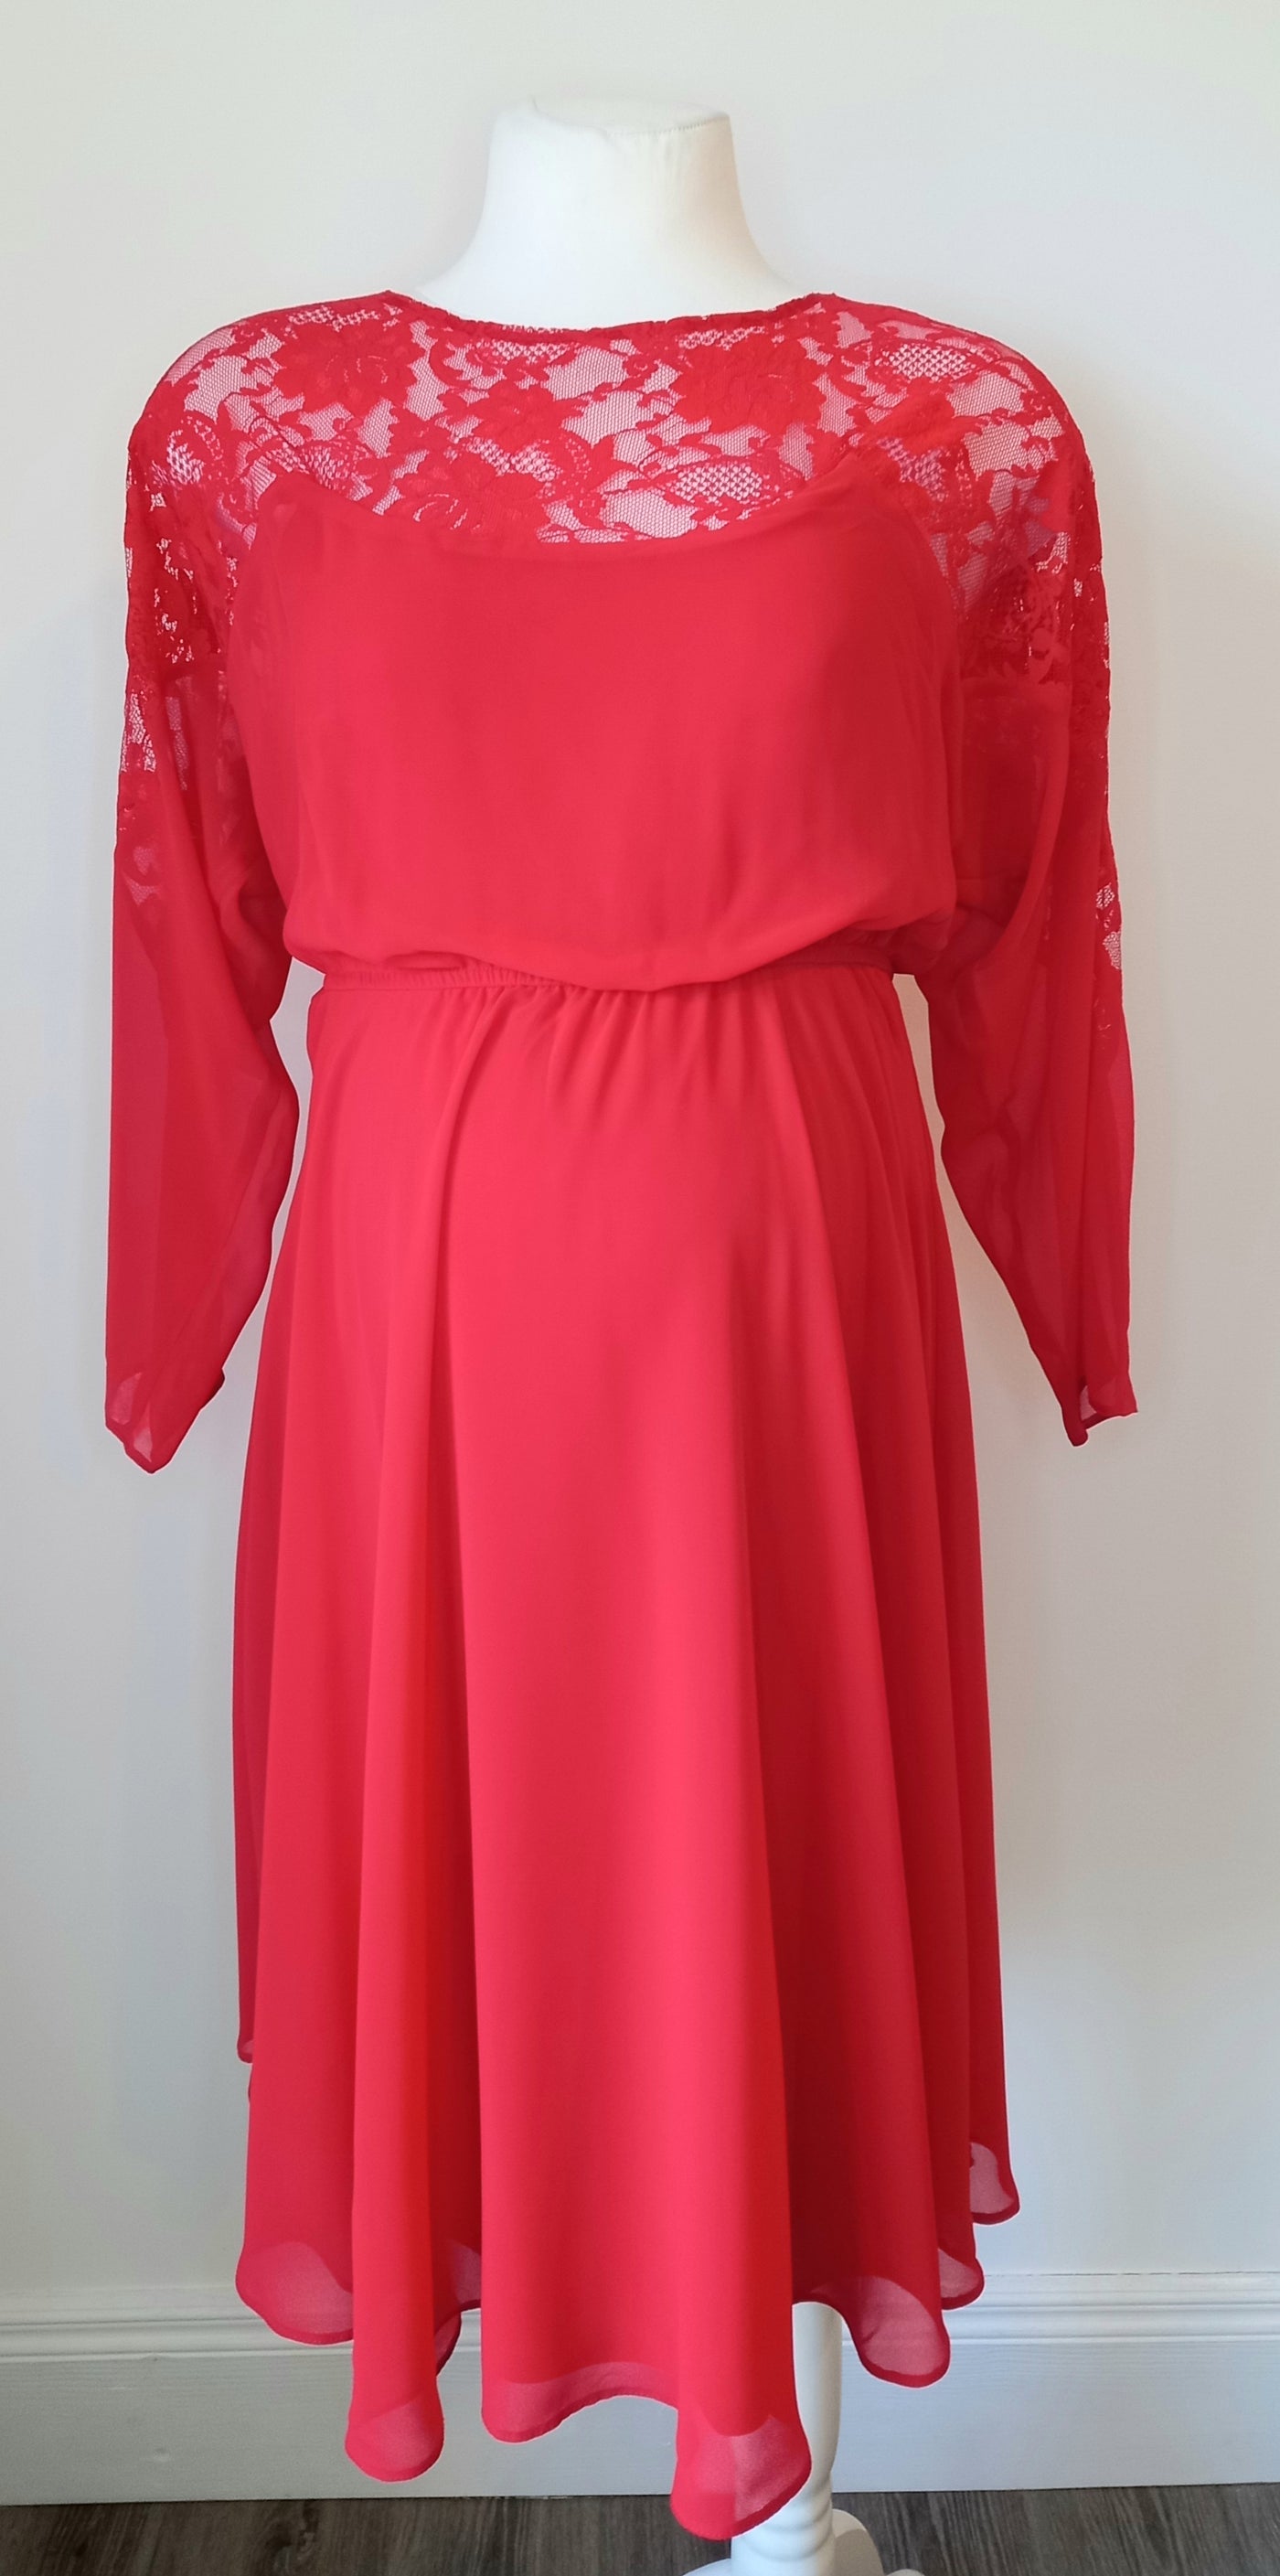 Asos Maternity Red Lace Shoulder Dress - Size 10